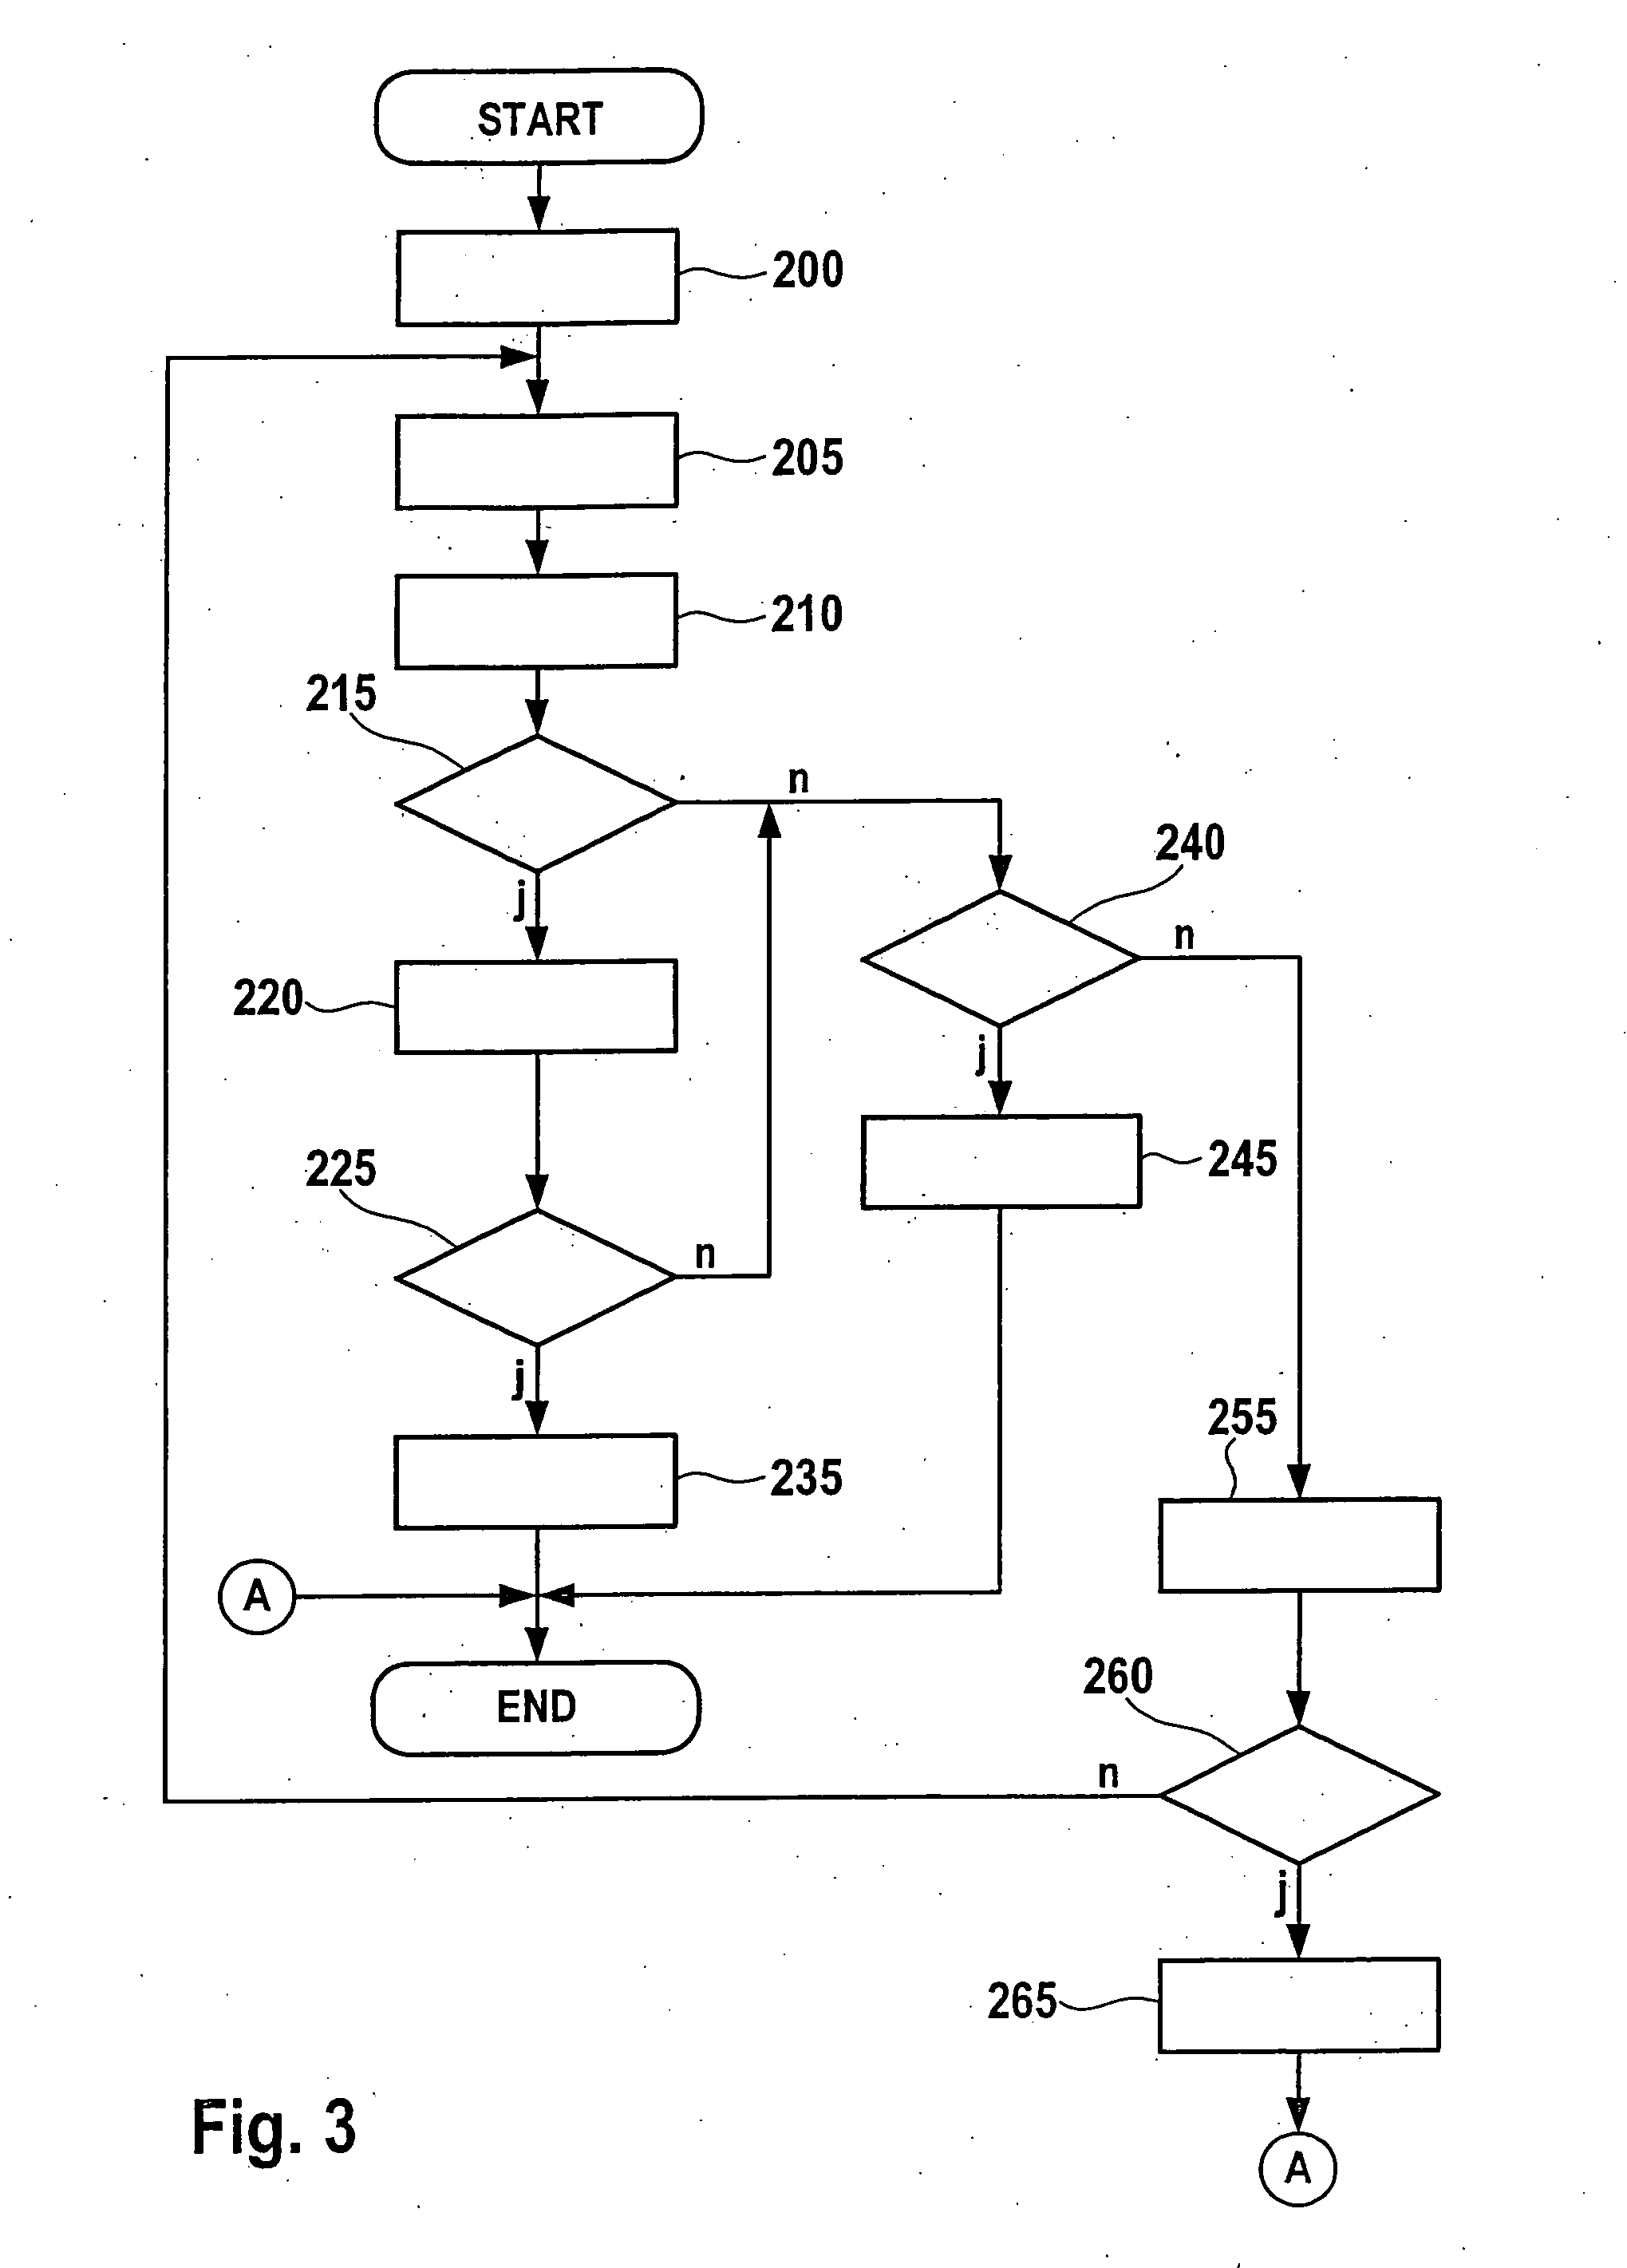 Device and method for monitoring the intake manifold pressure of an internal combustion engine